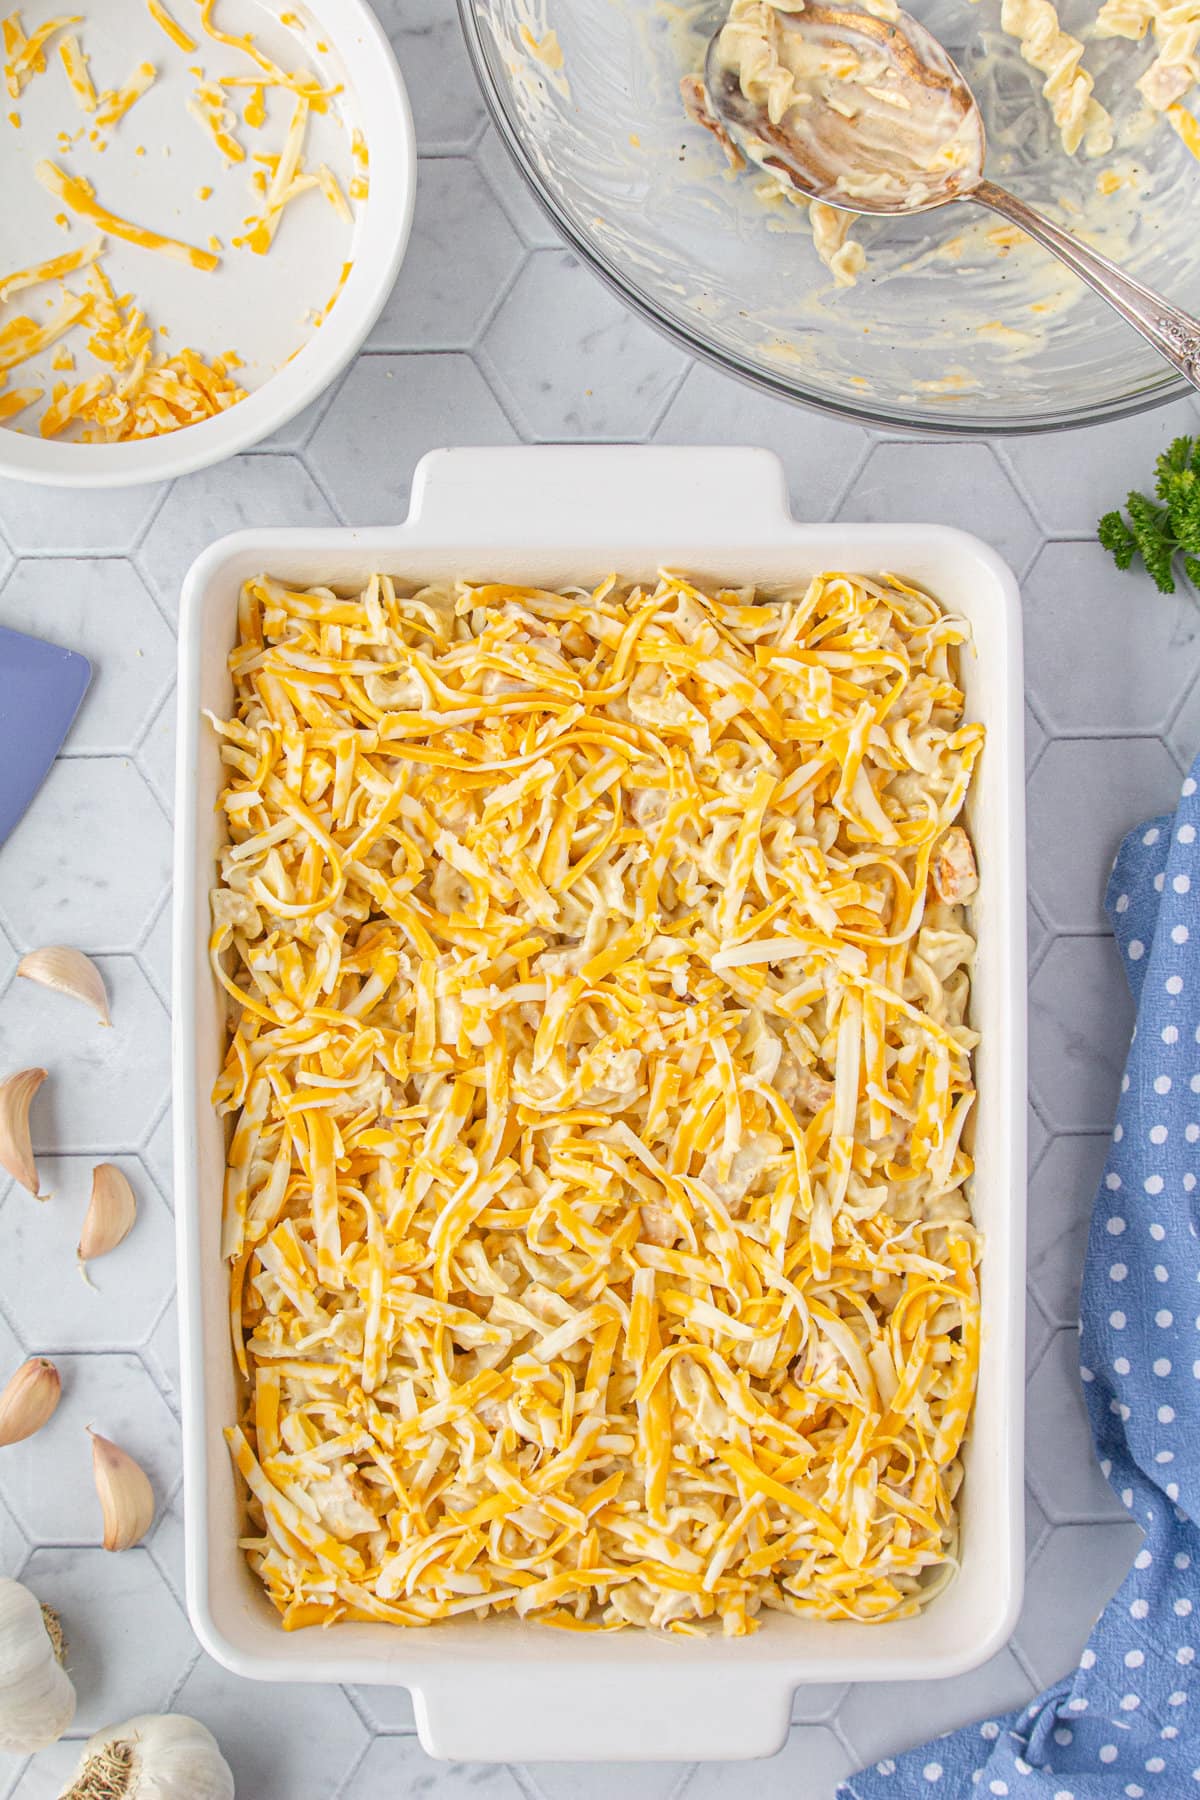 The ingredients spread in a casserole dish, topped with cheese.